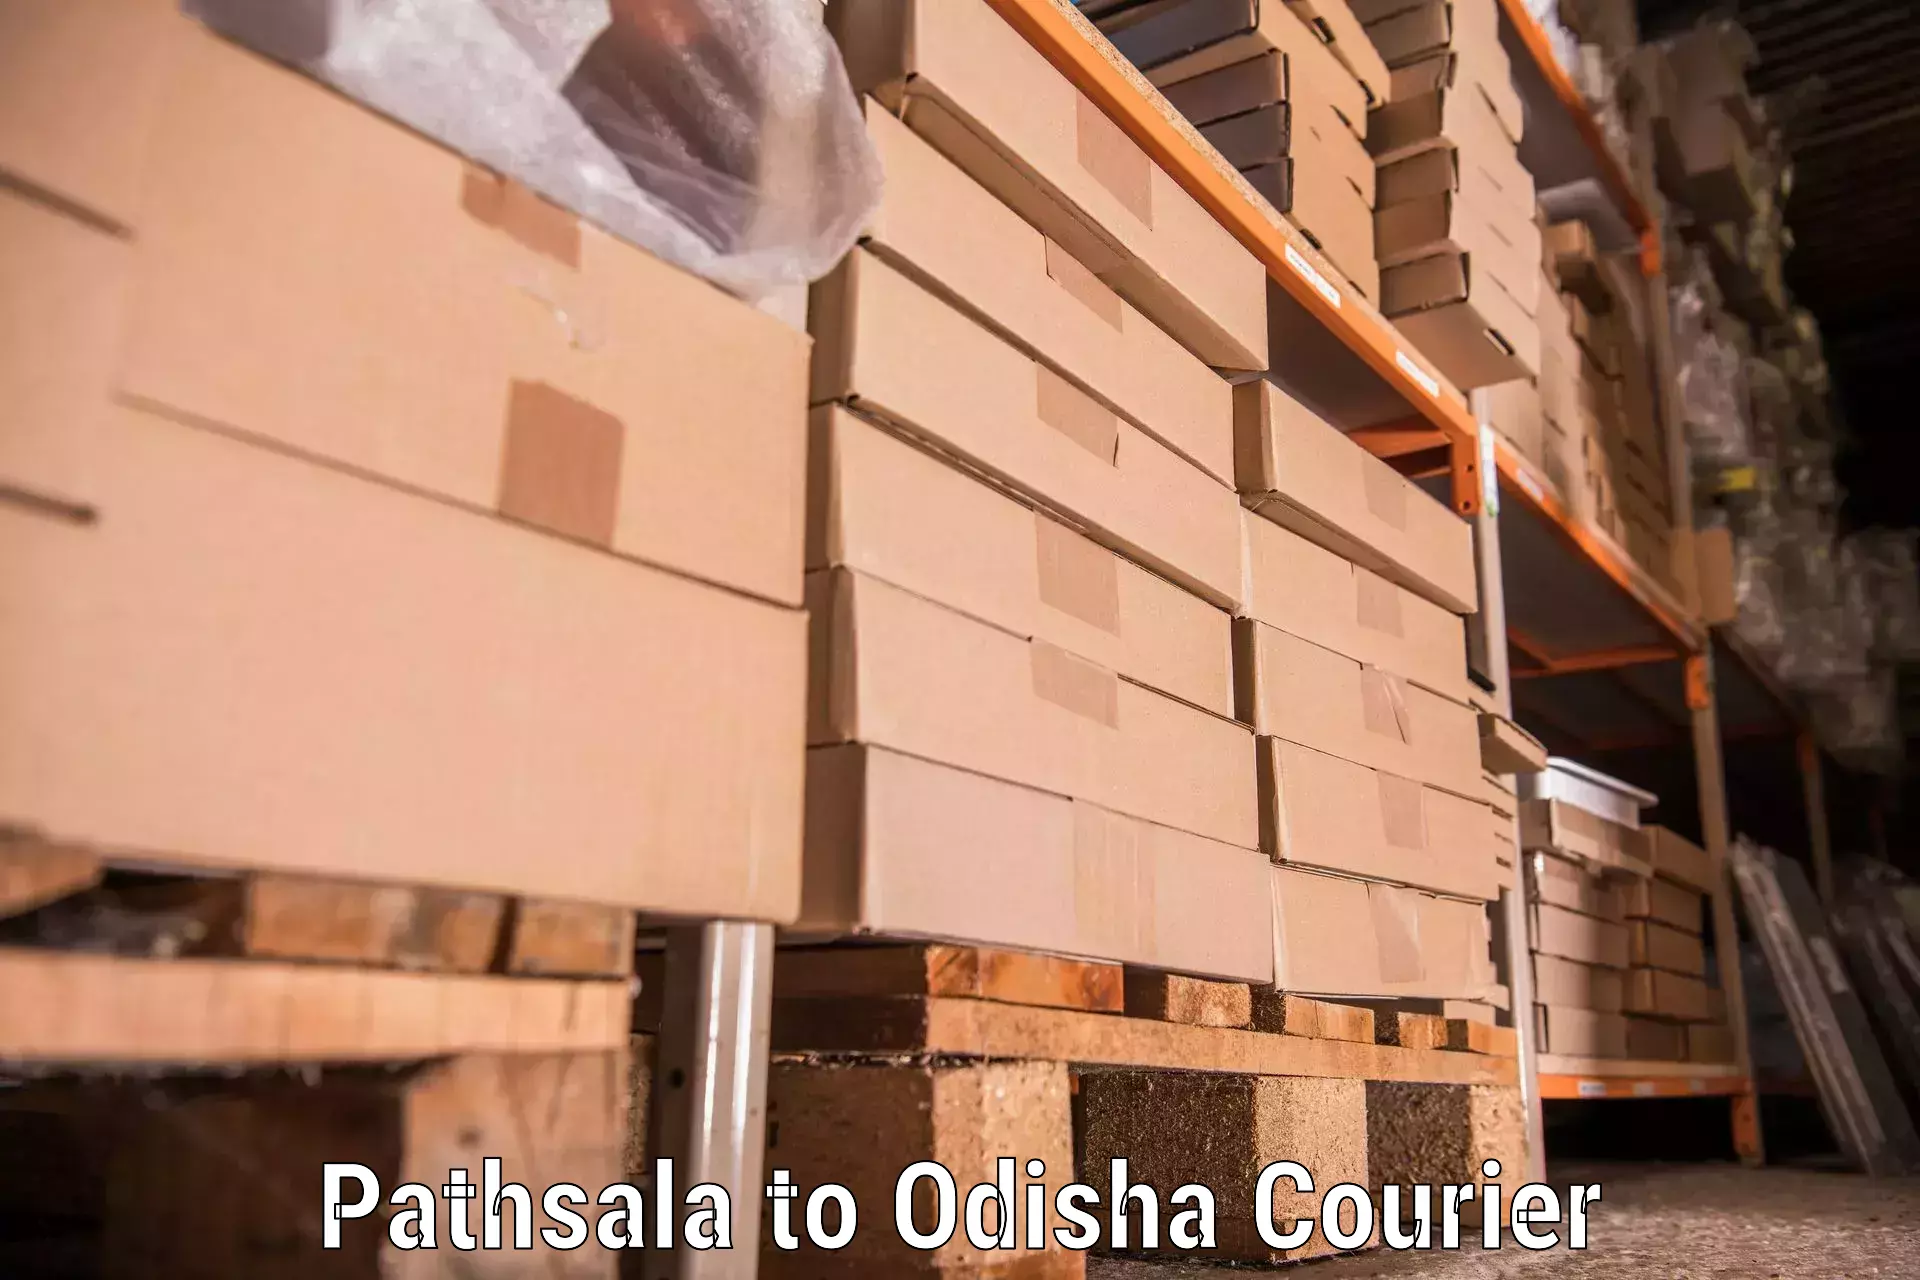 Moving and packing experts Pathsala to Raighar